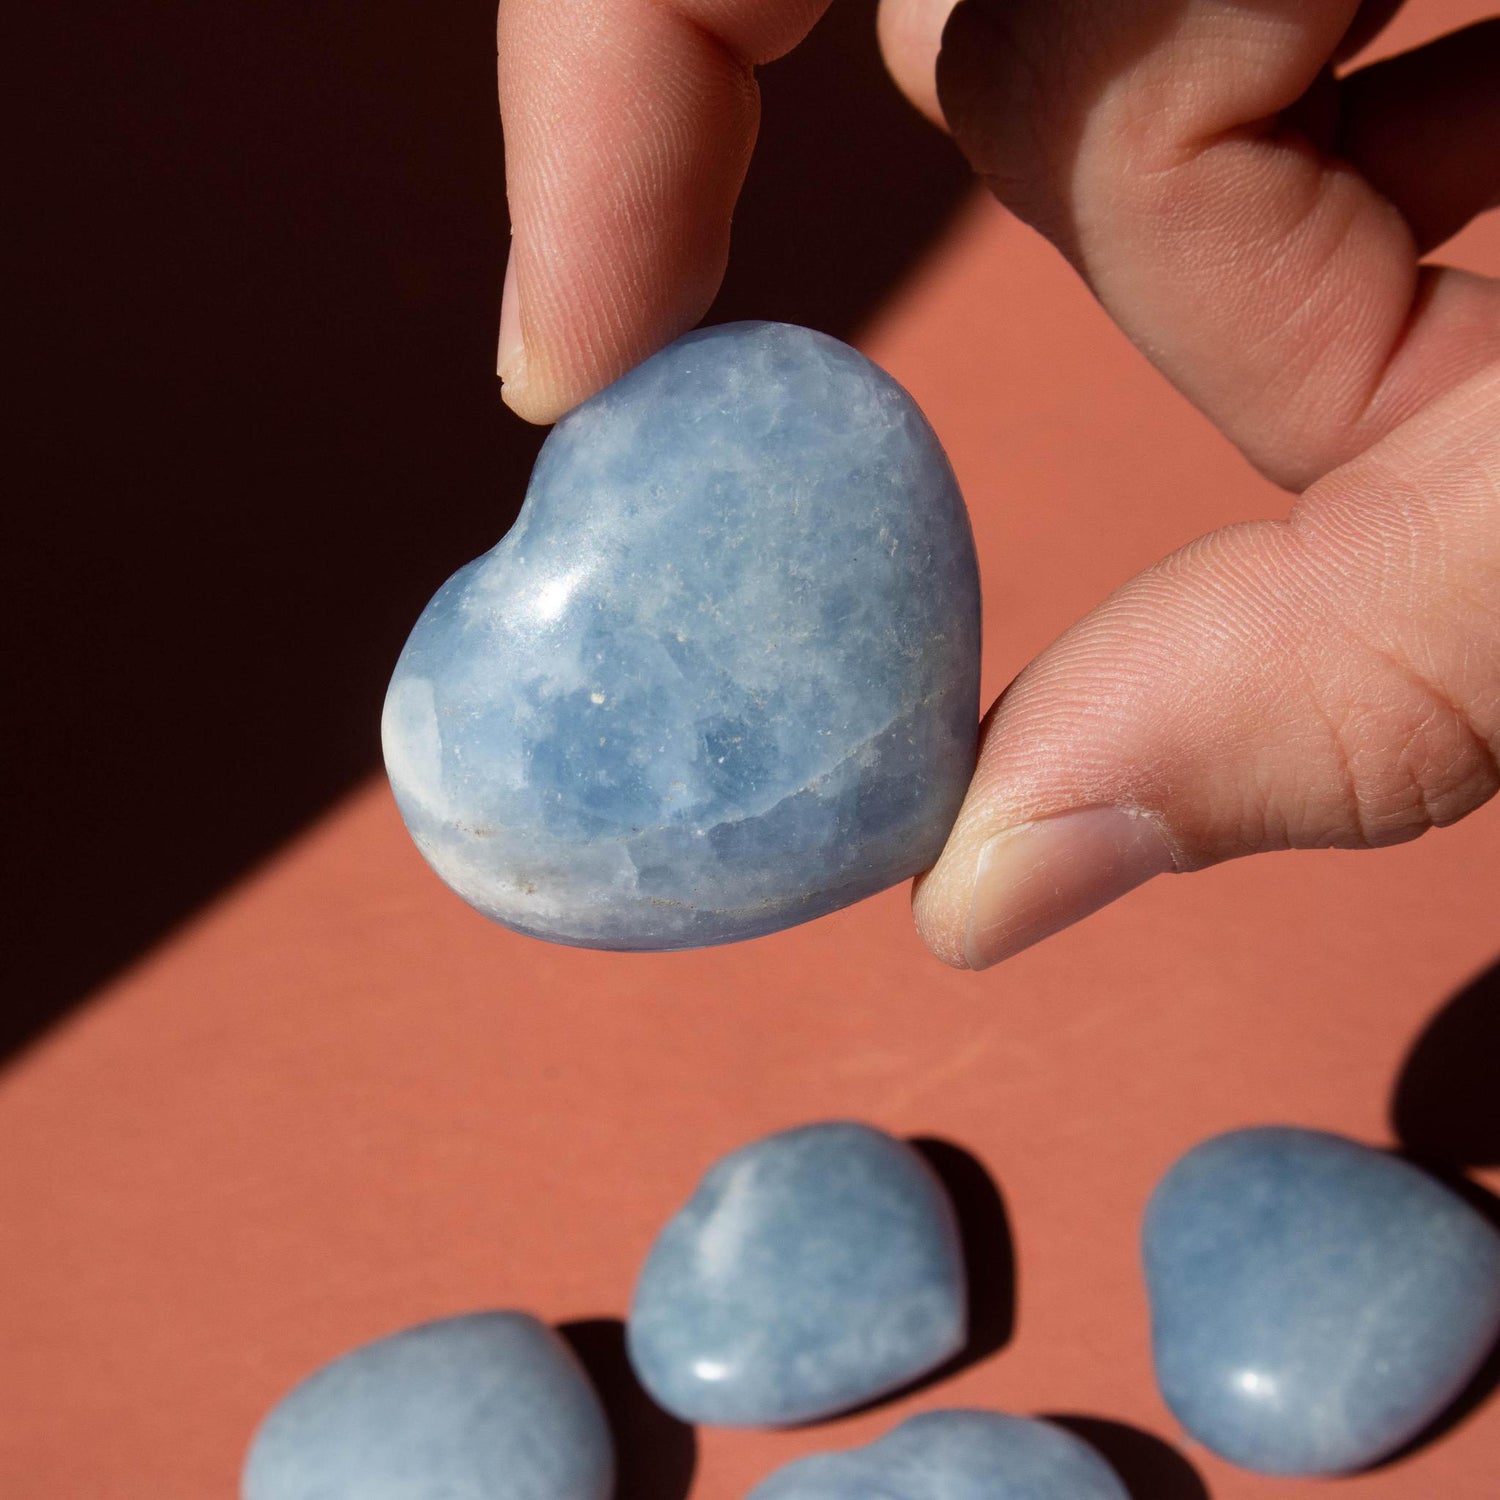 blue calcite, blue calcite heart, crystal heart, blue calcite crystal, blue calcite stone, blue calcite properties, blue calcite healing properties, blue calcite metaphysical properties, blue calcite meaning